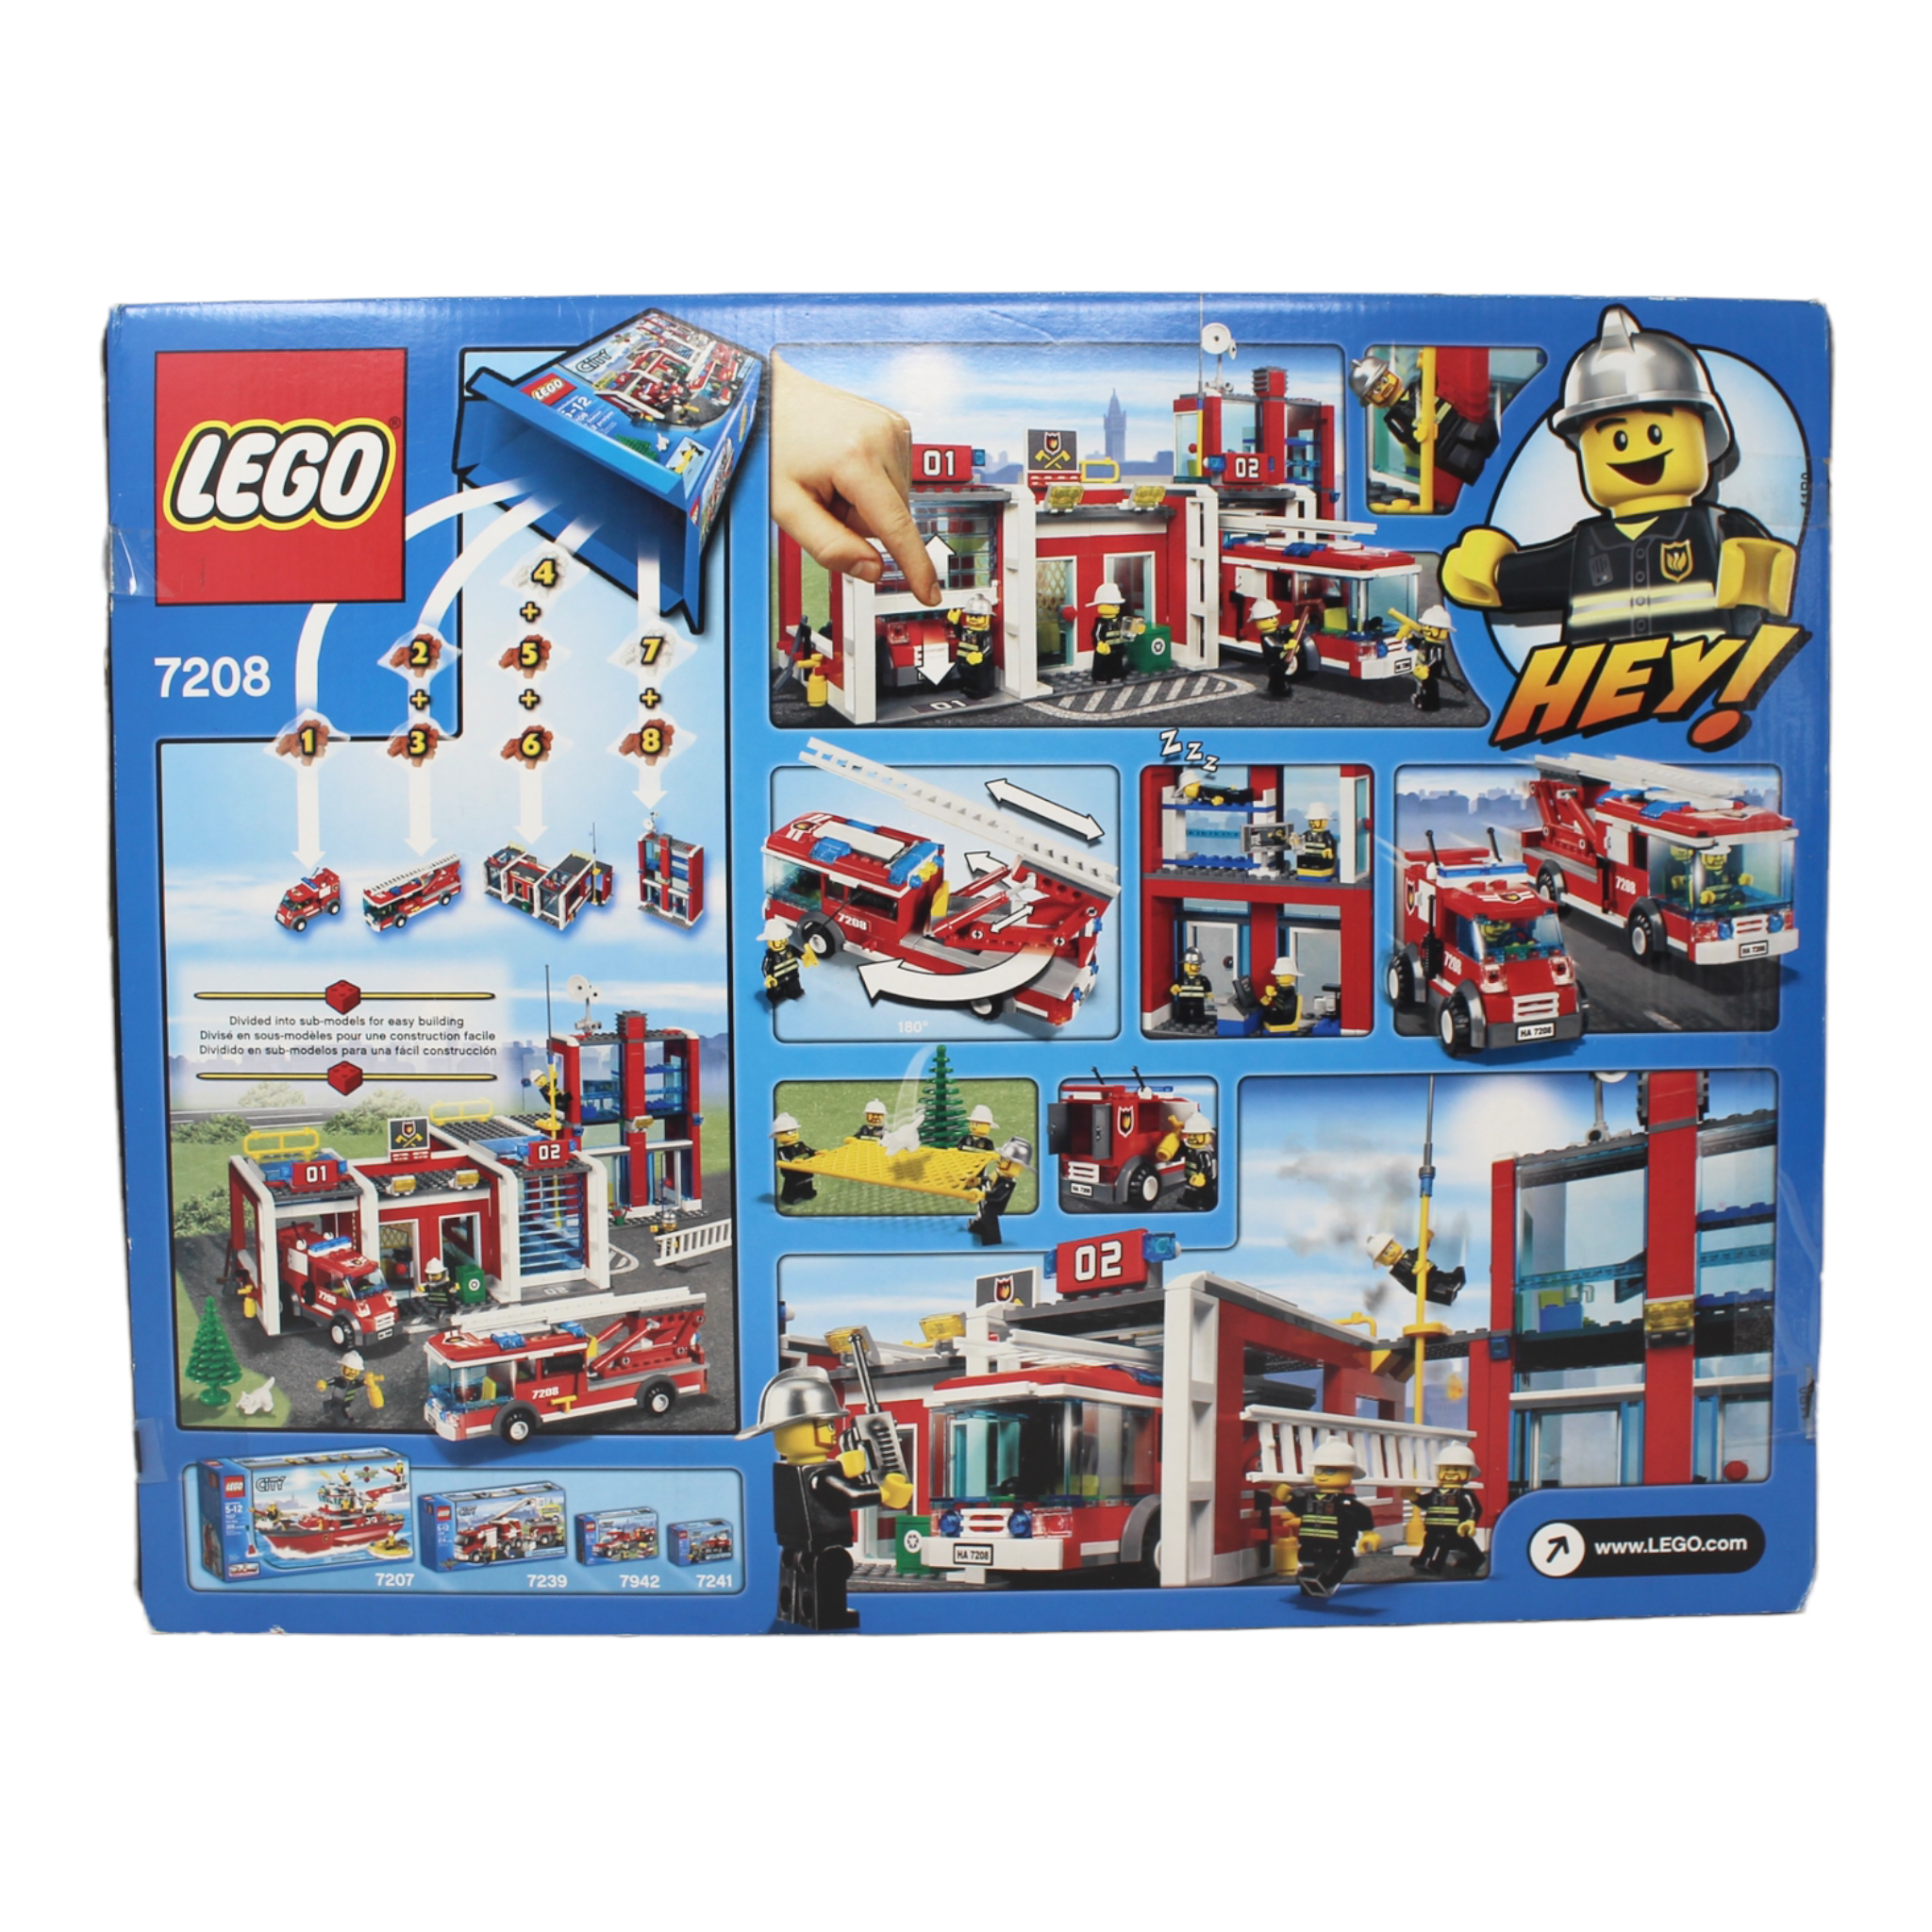 Certified Used Set 7208 City Fire Station